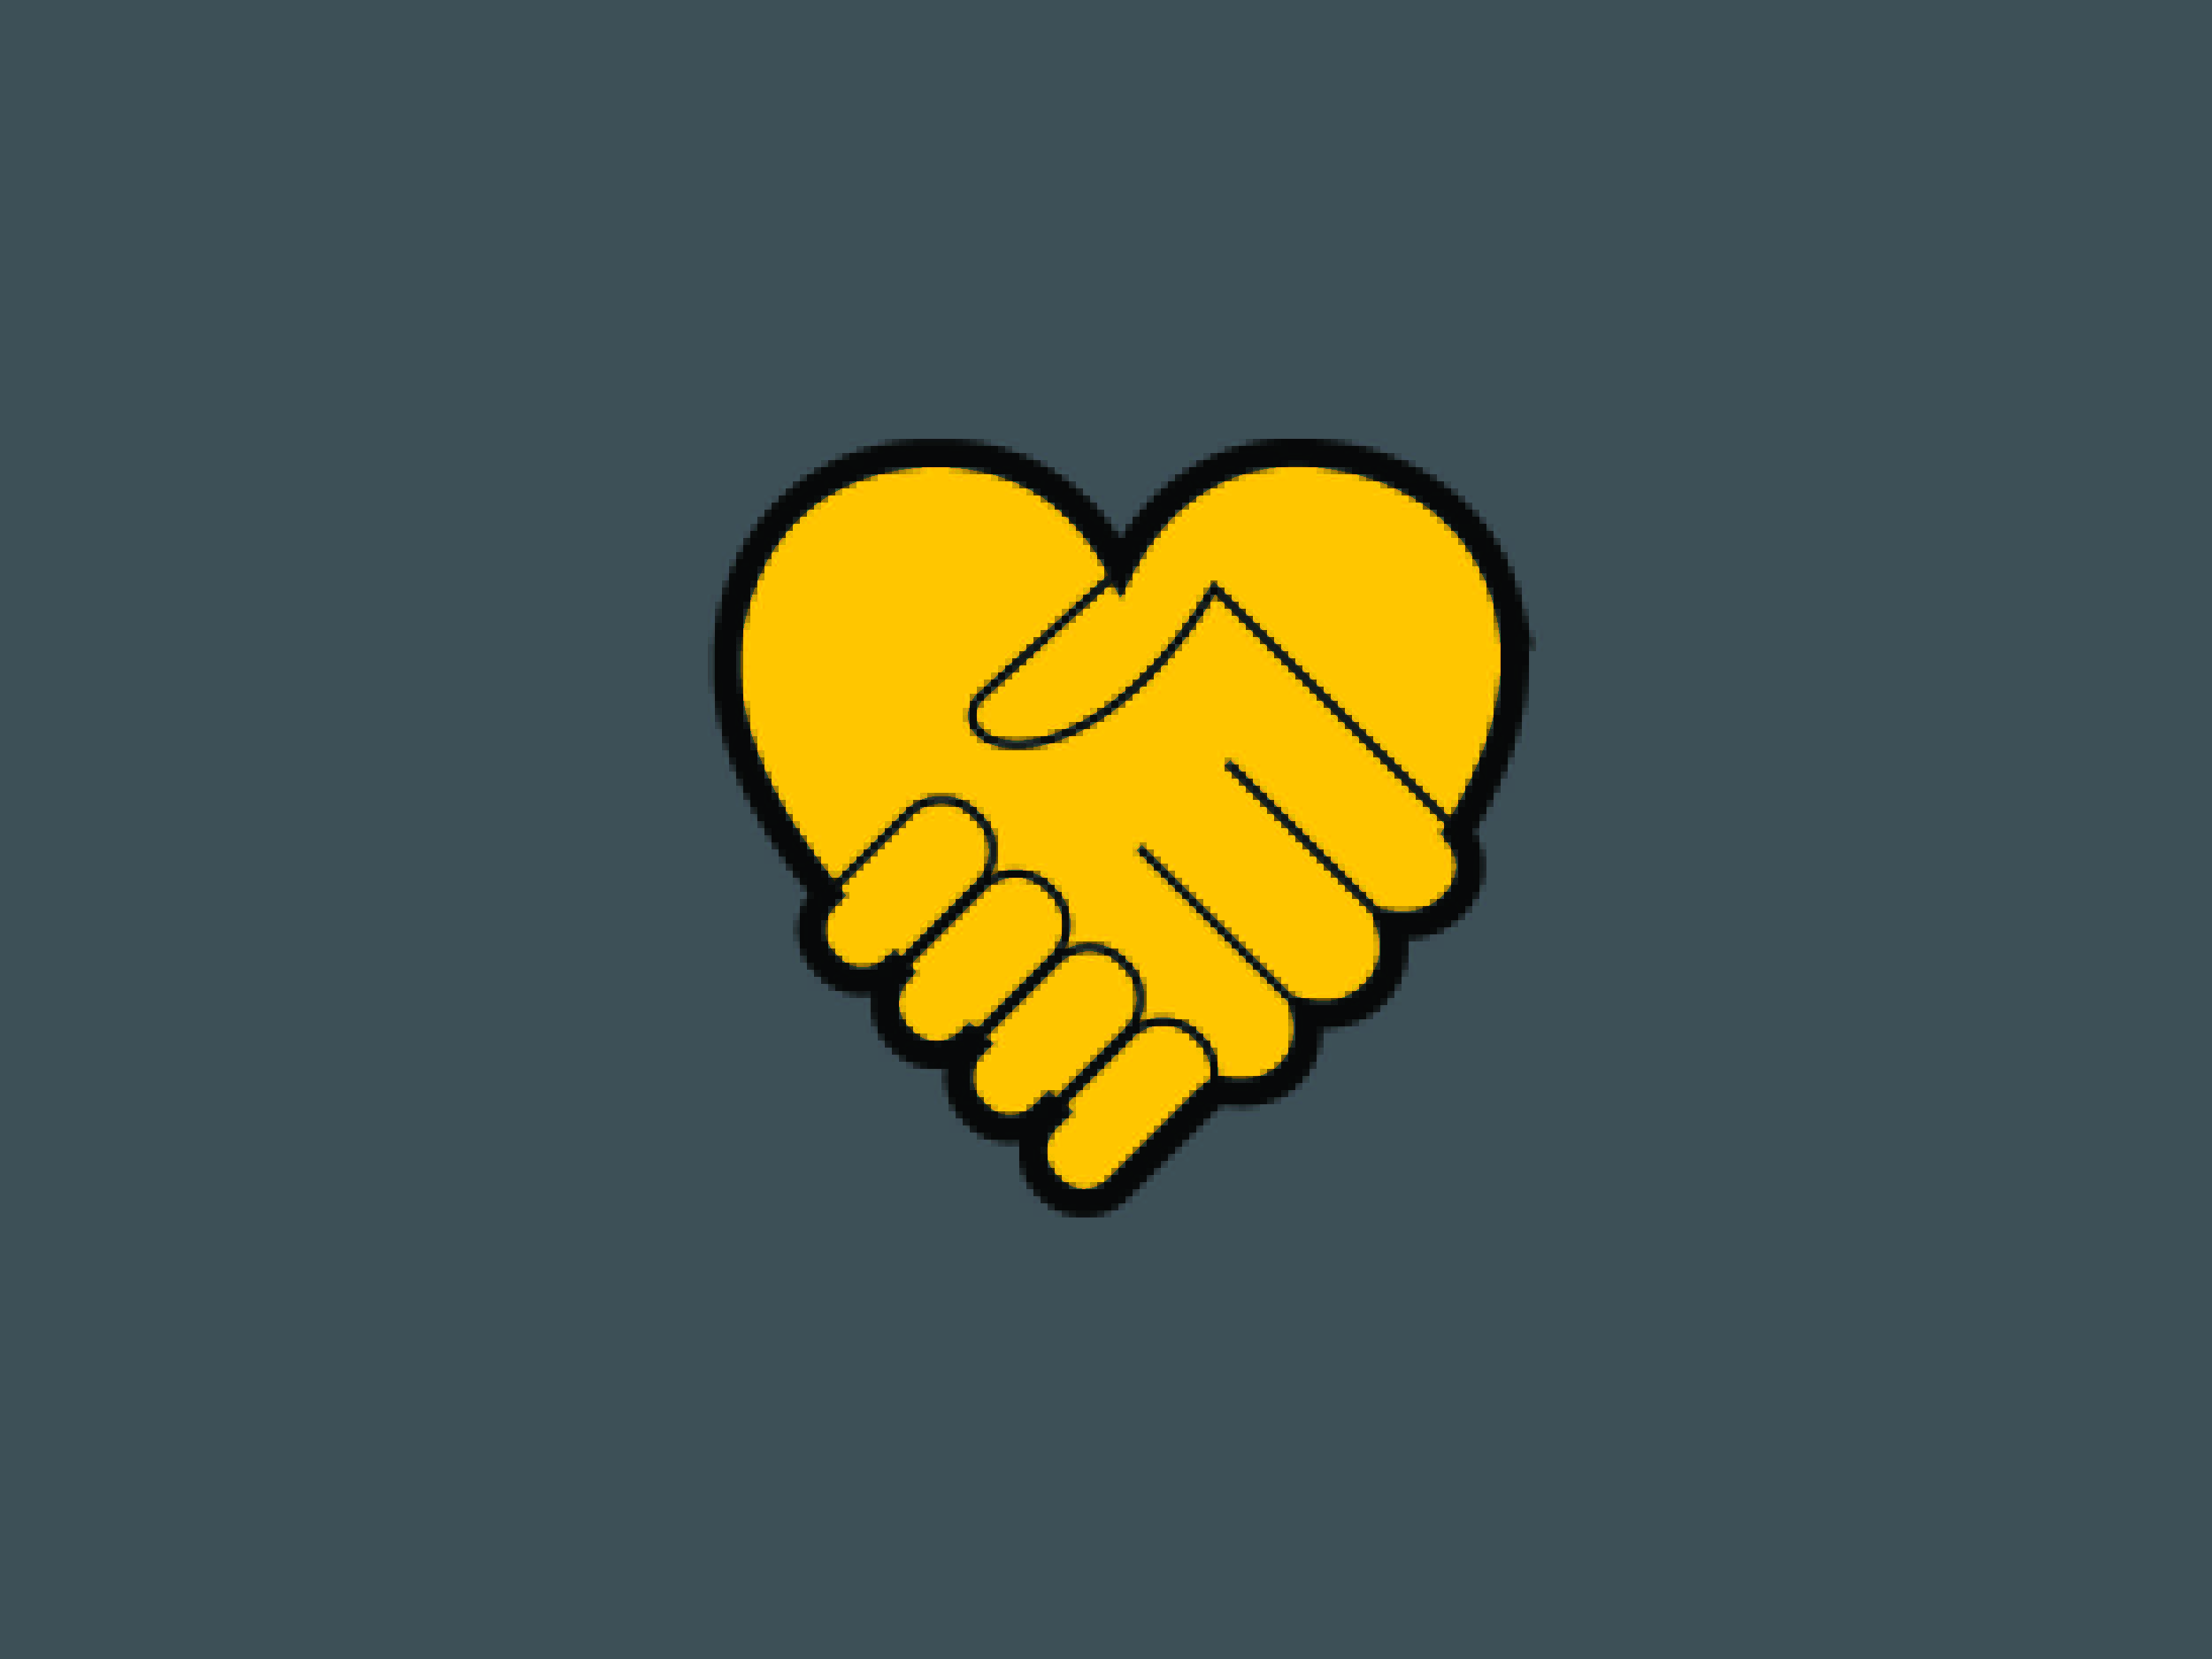 Digital drawing of two yellow hands shaking in the shape of a heart on a dark gray background.